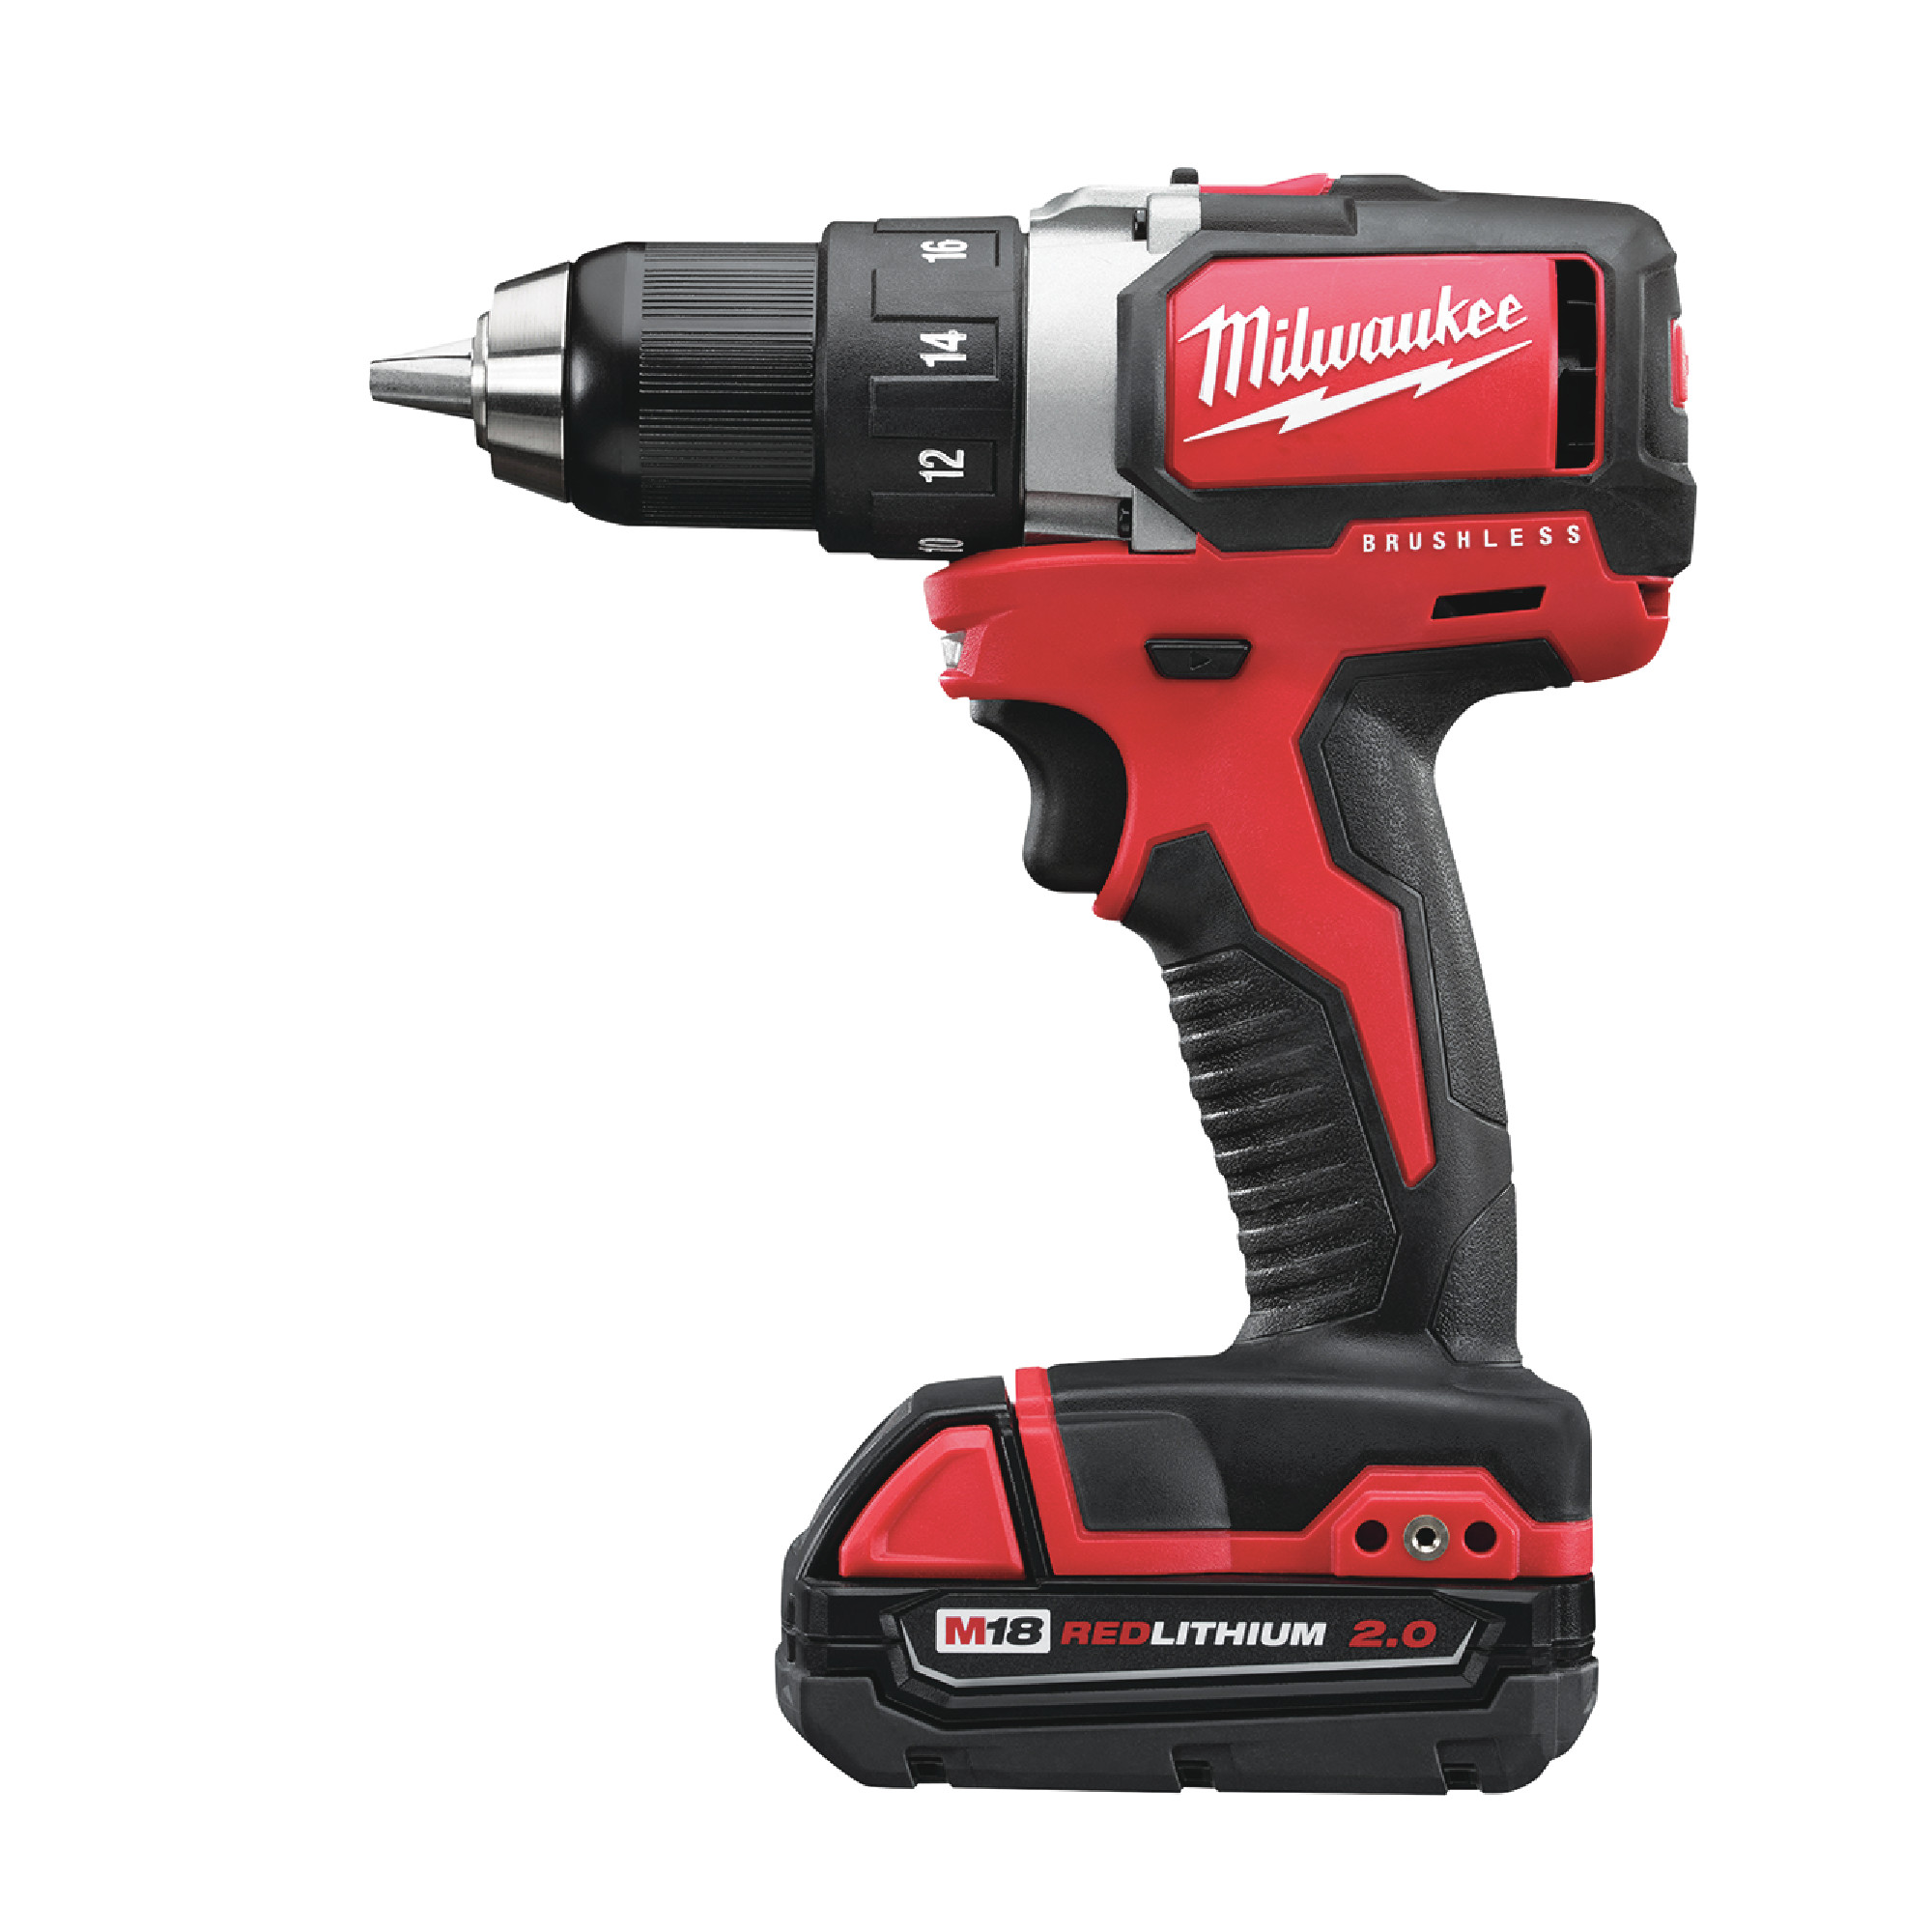 M18&#8482; 1/2" Compact Brushless Drill/Driver Kit